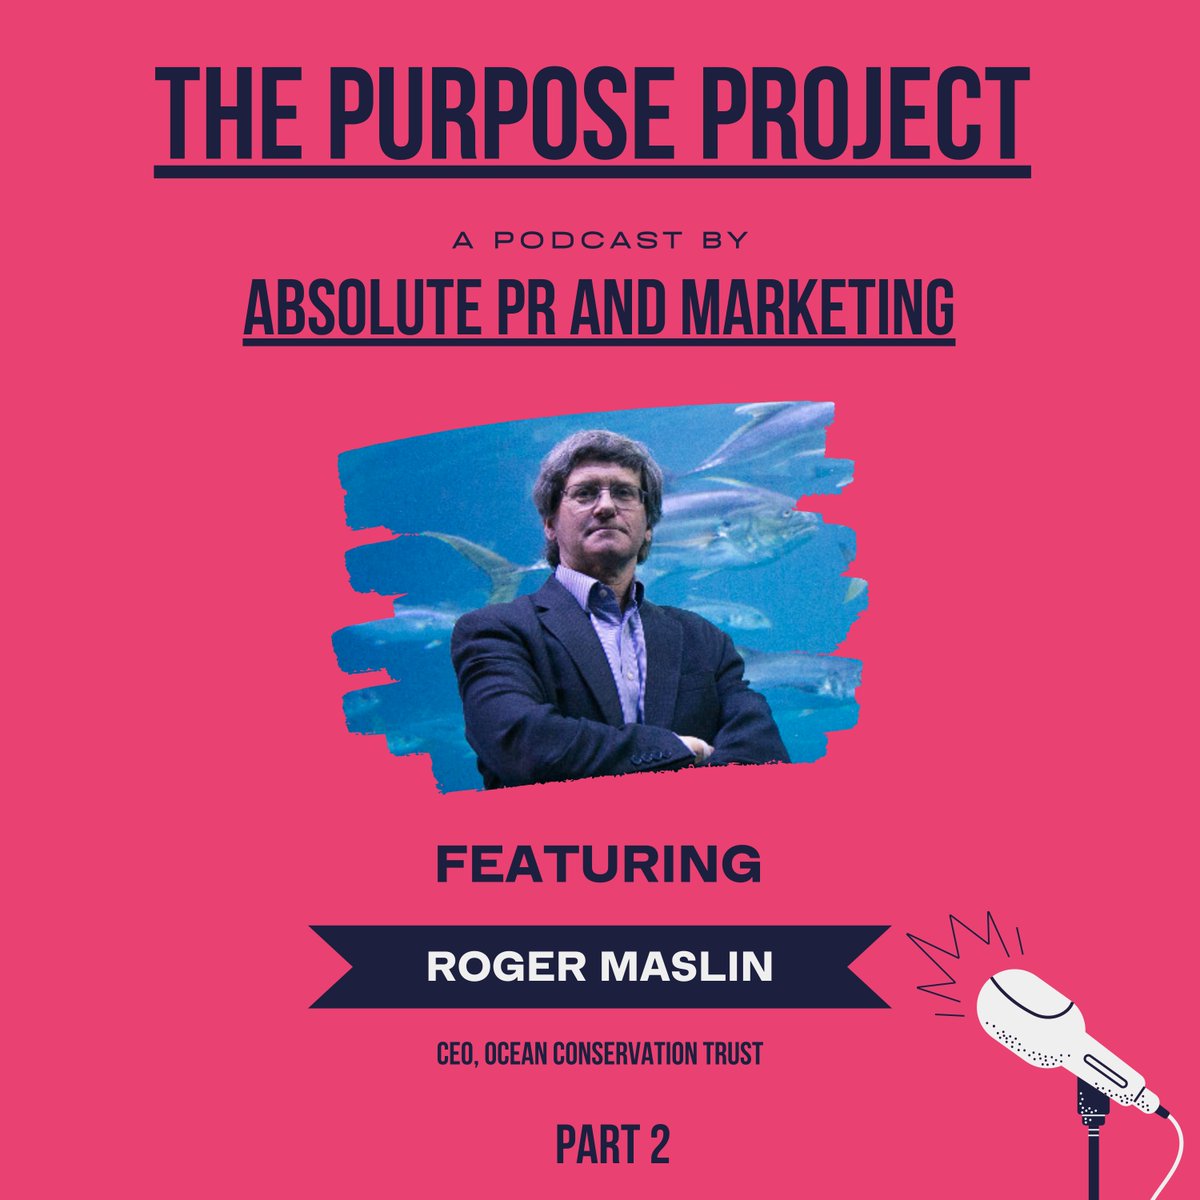 In the next episode of #TheAbsolutePurposeProject, we're sharing part two of our interview with Roger Maslin!

Roger is CEO of @OceanCTrust, and the @NMAPlymouth, working towards a vision of healthy oceans and showcasing the sea and all it has to offer.

open.spotify.com/show/1Tbpf5Dc0…